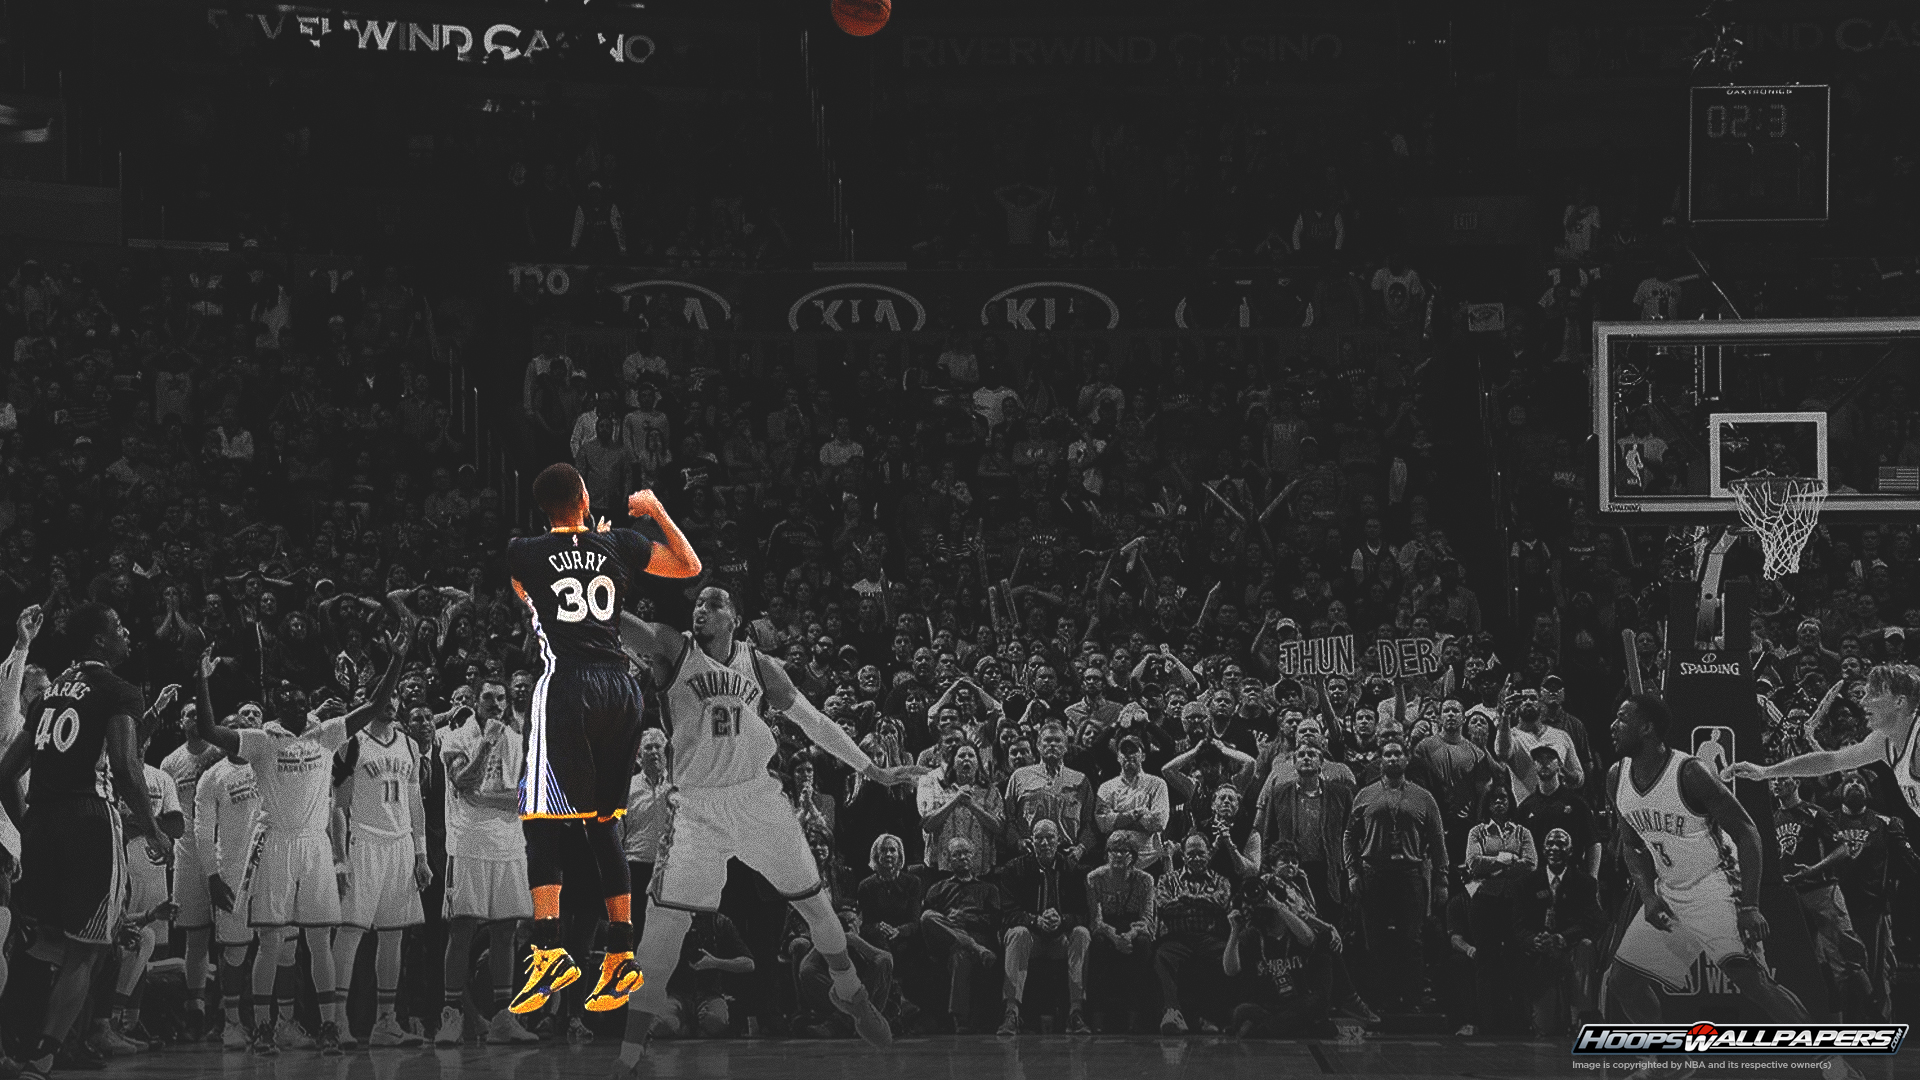 Stephen Curry Winning Against The Thunder Wallpaper Click On